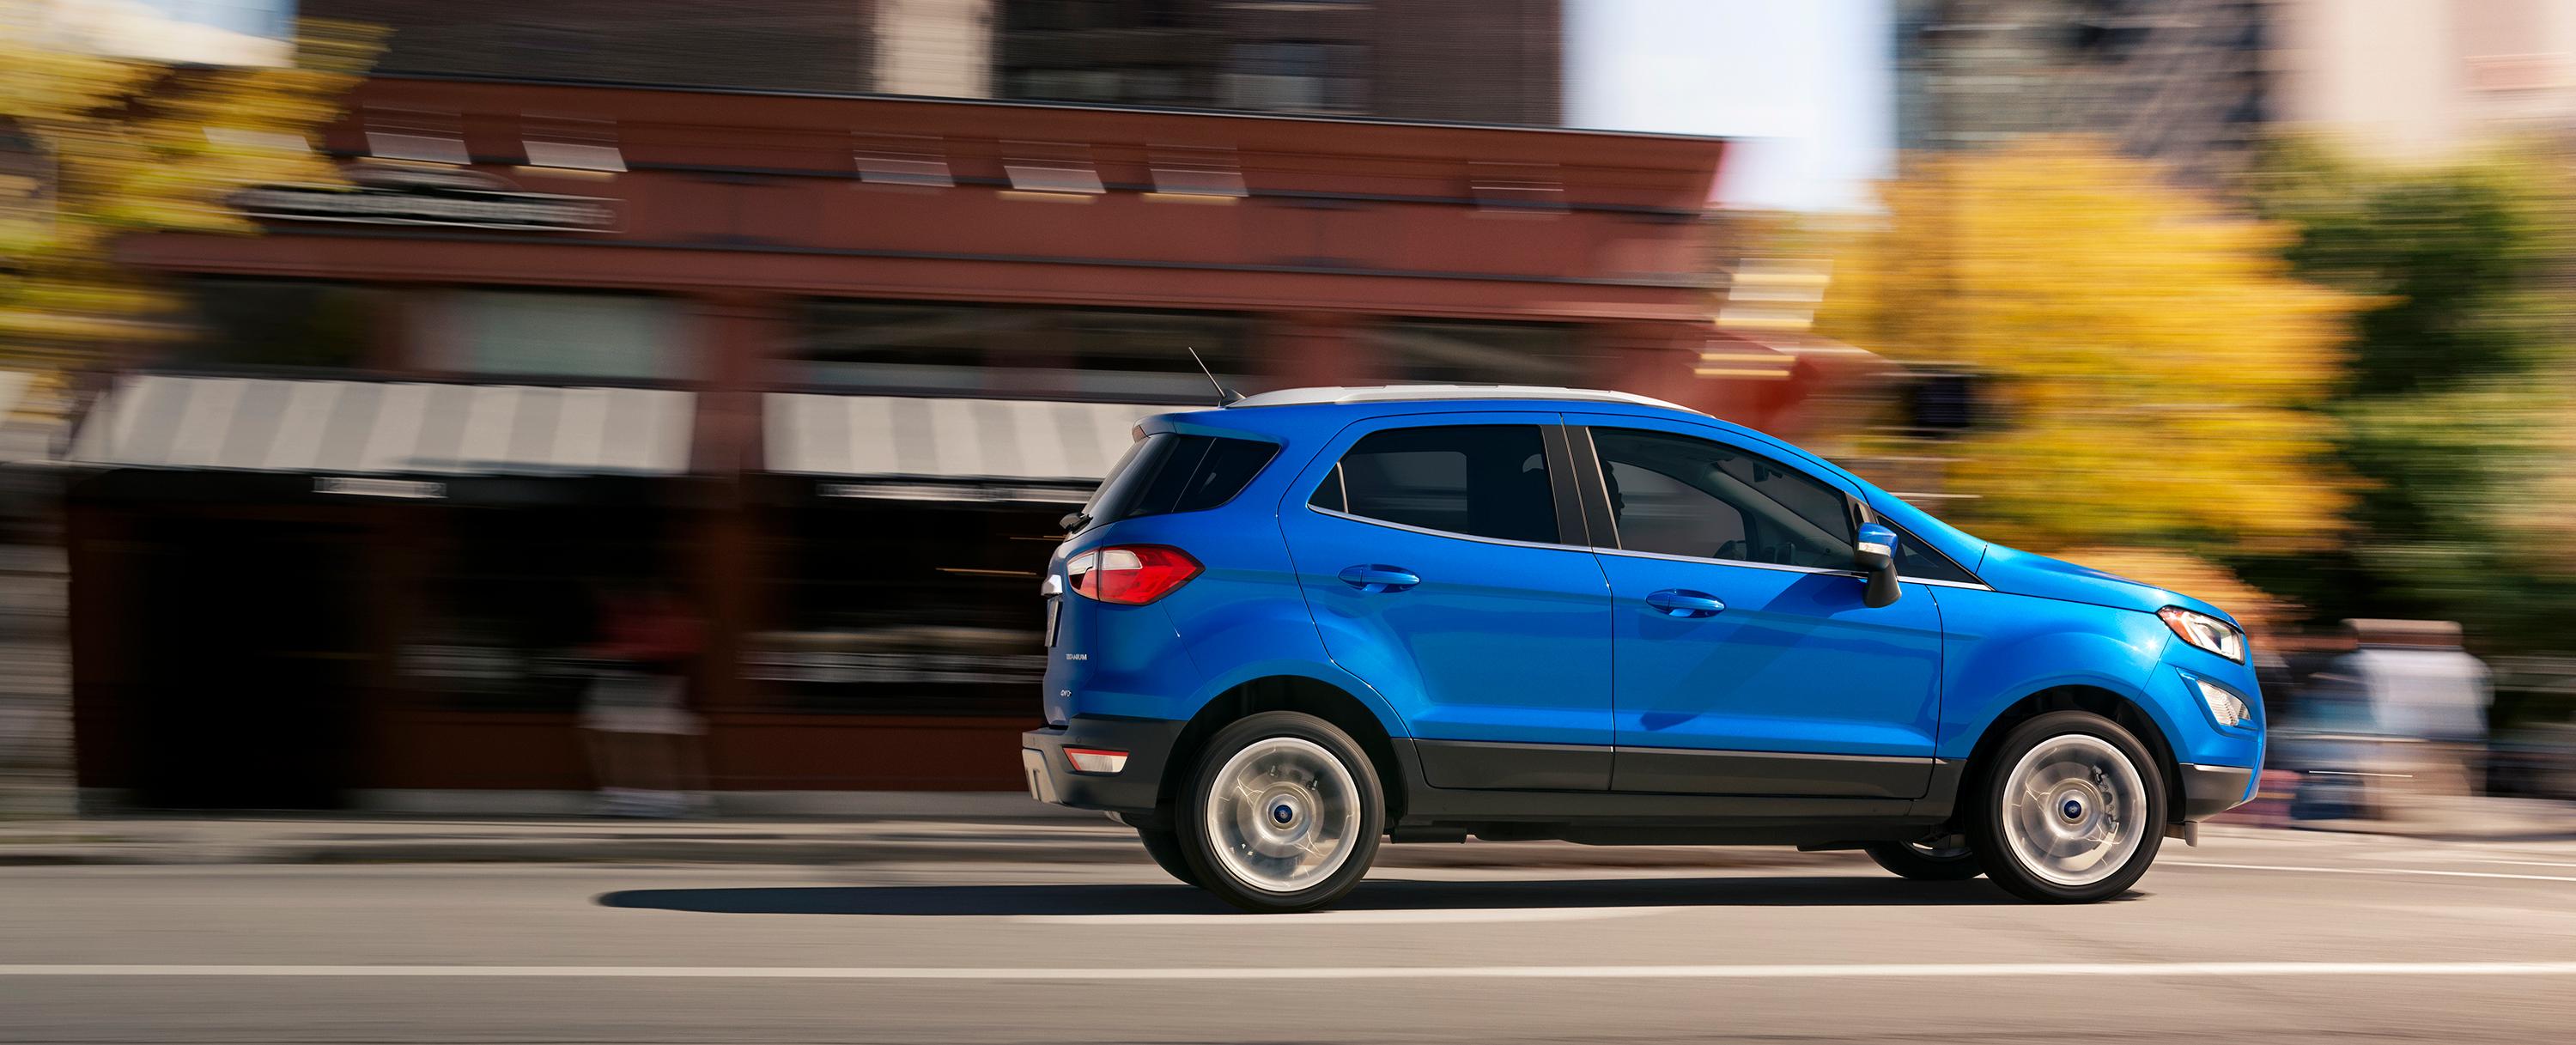 rebates-for-the-2020-ford-ecosport-at-pauli-ford-in-st-johns-mi